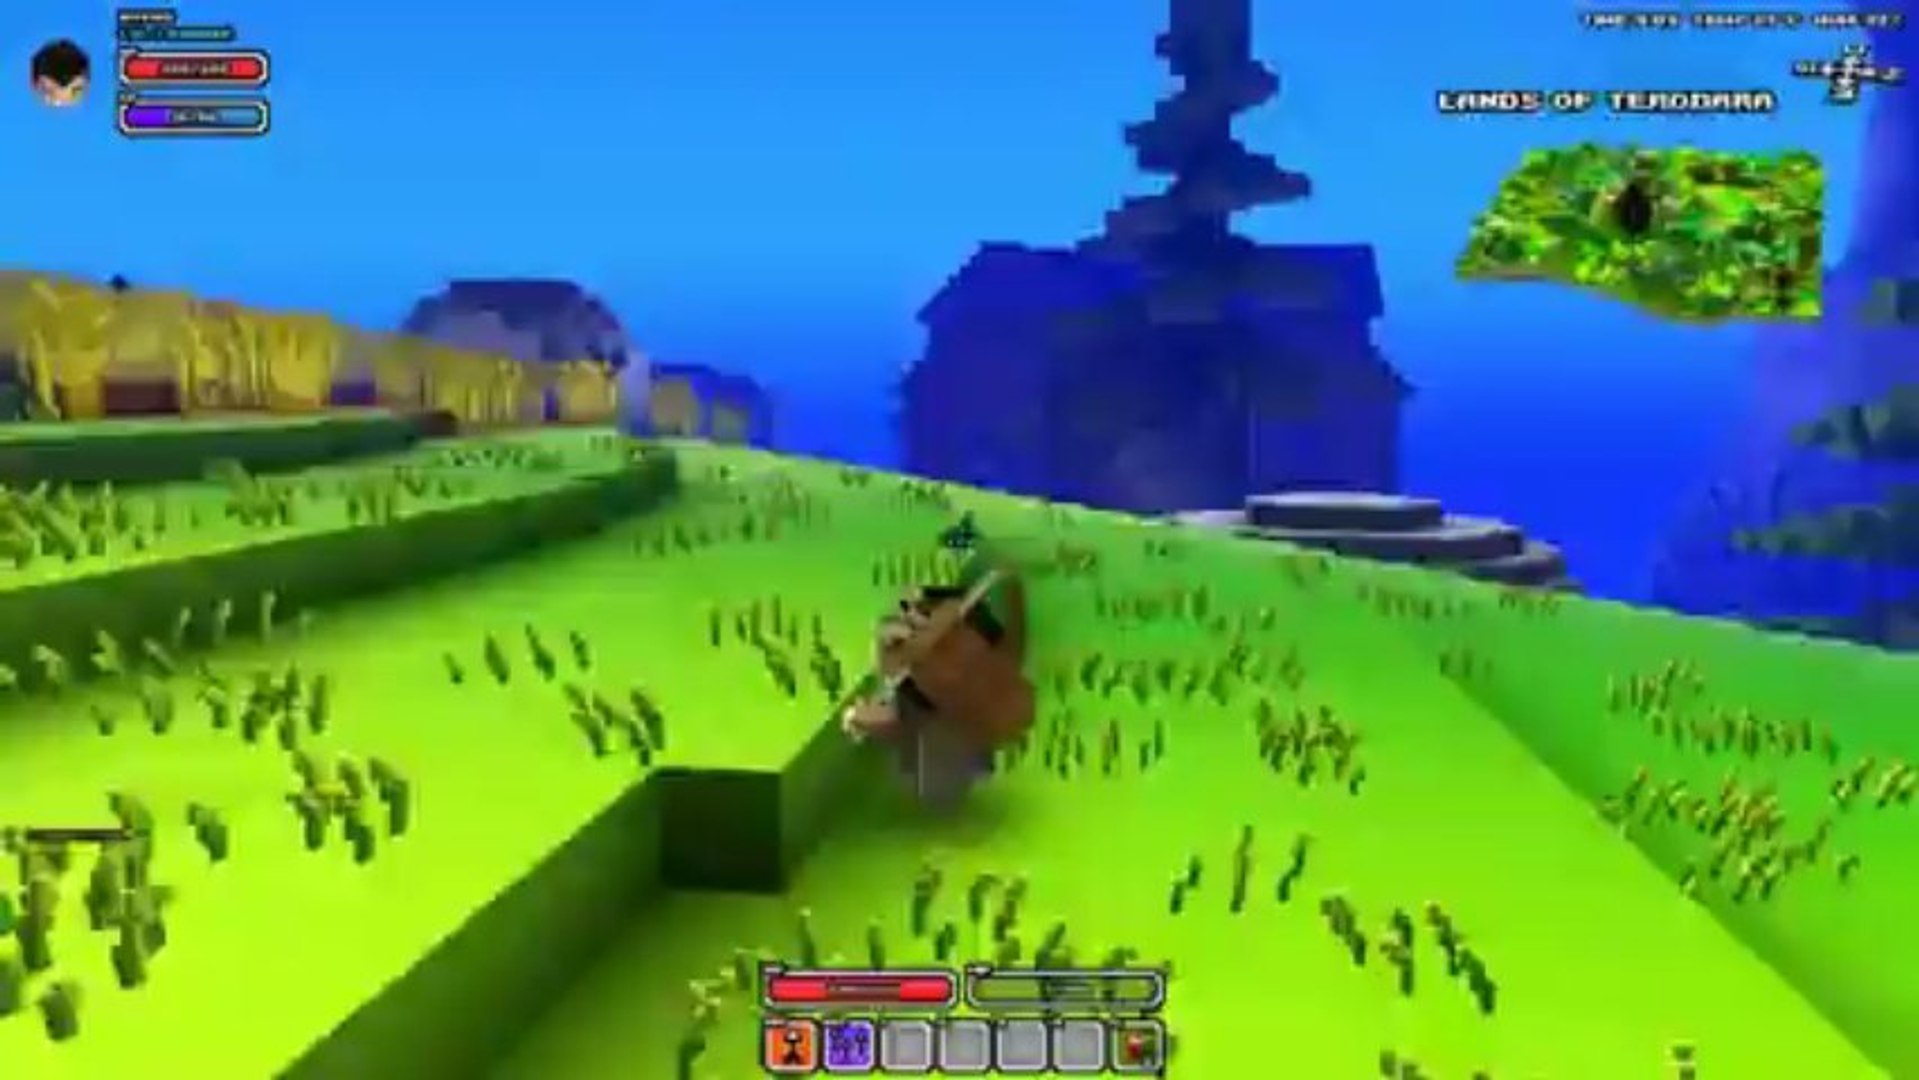 How To Make a Cube World Multiplayer Server with Hamachi - video Dailymotion